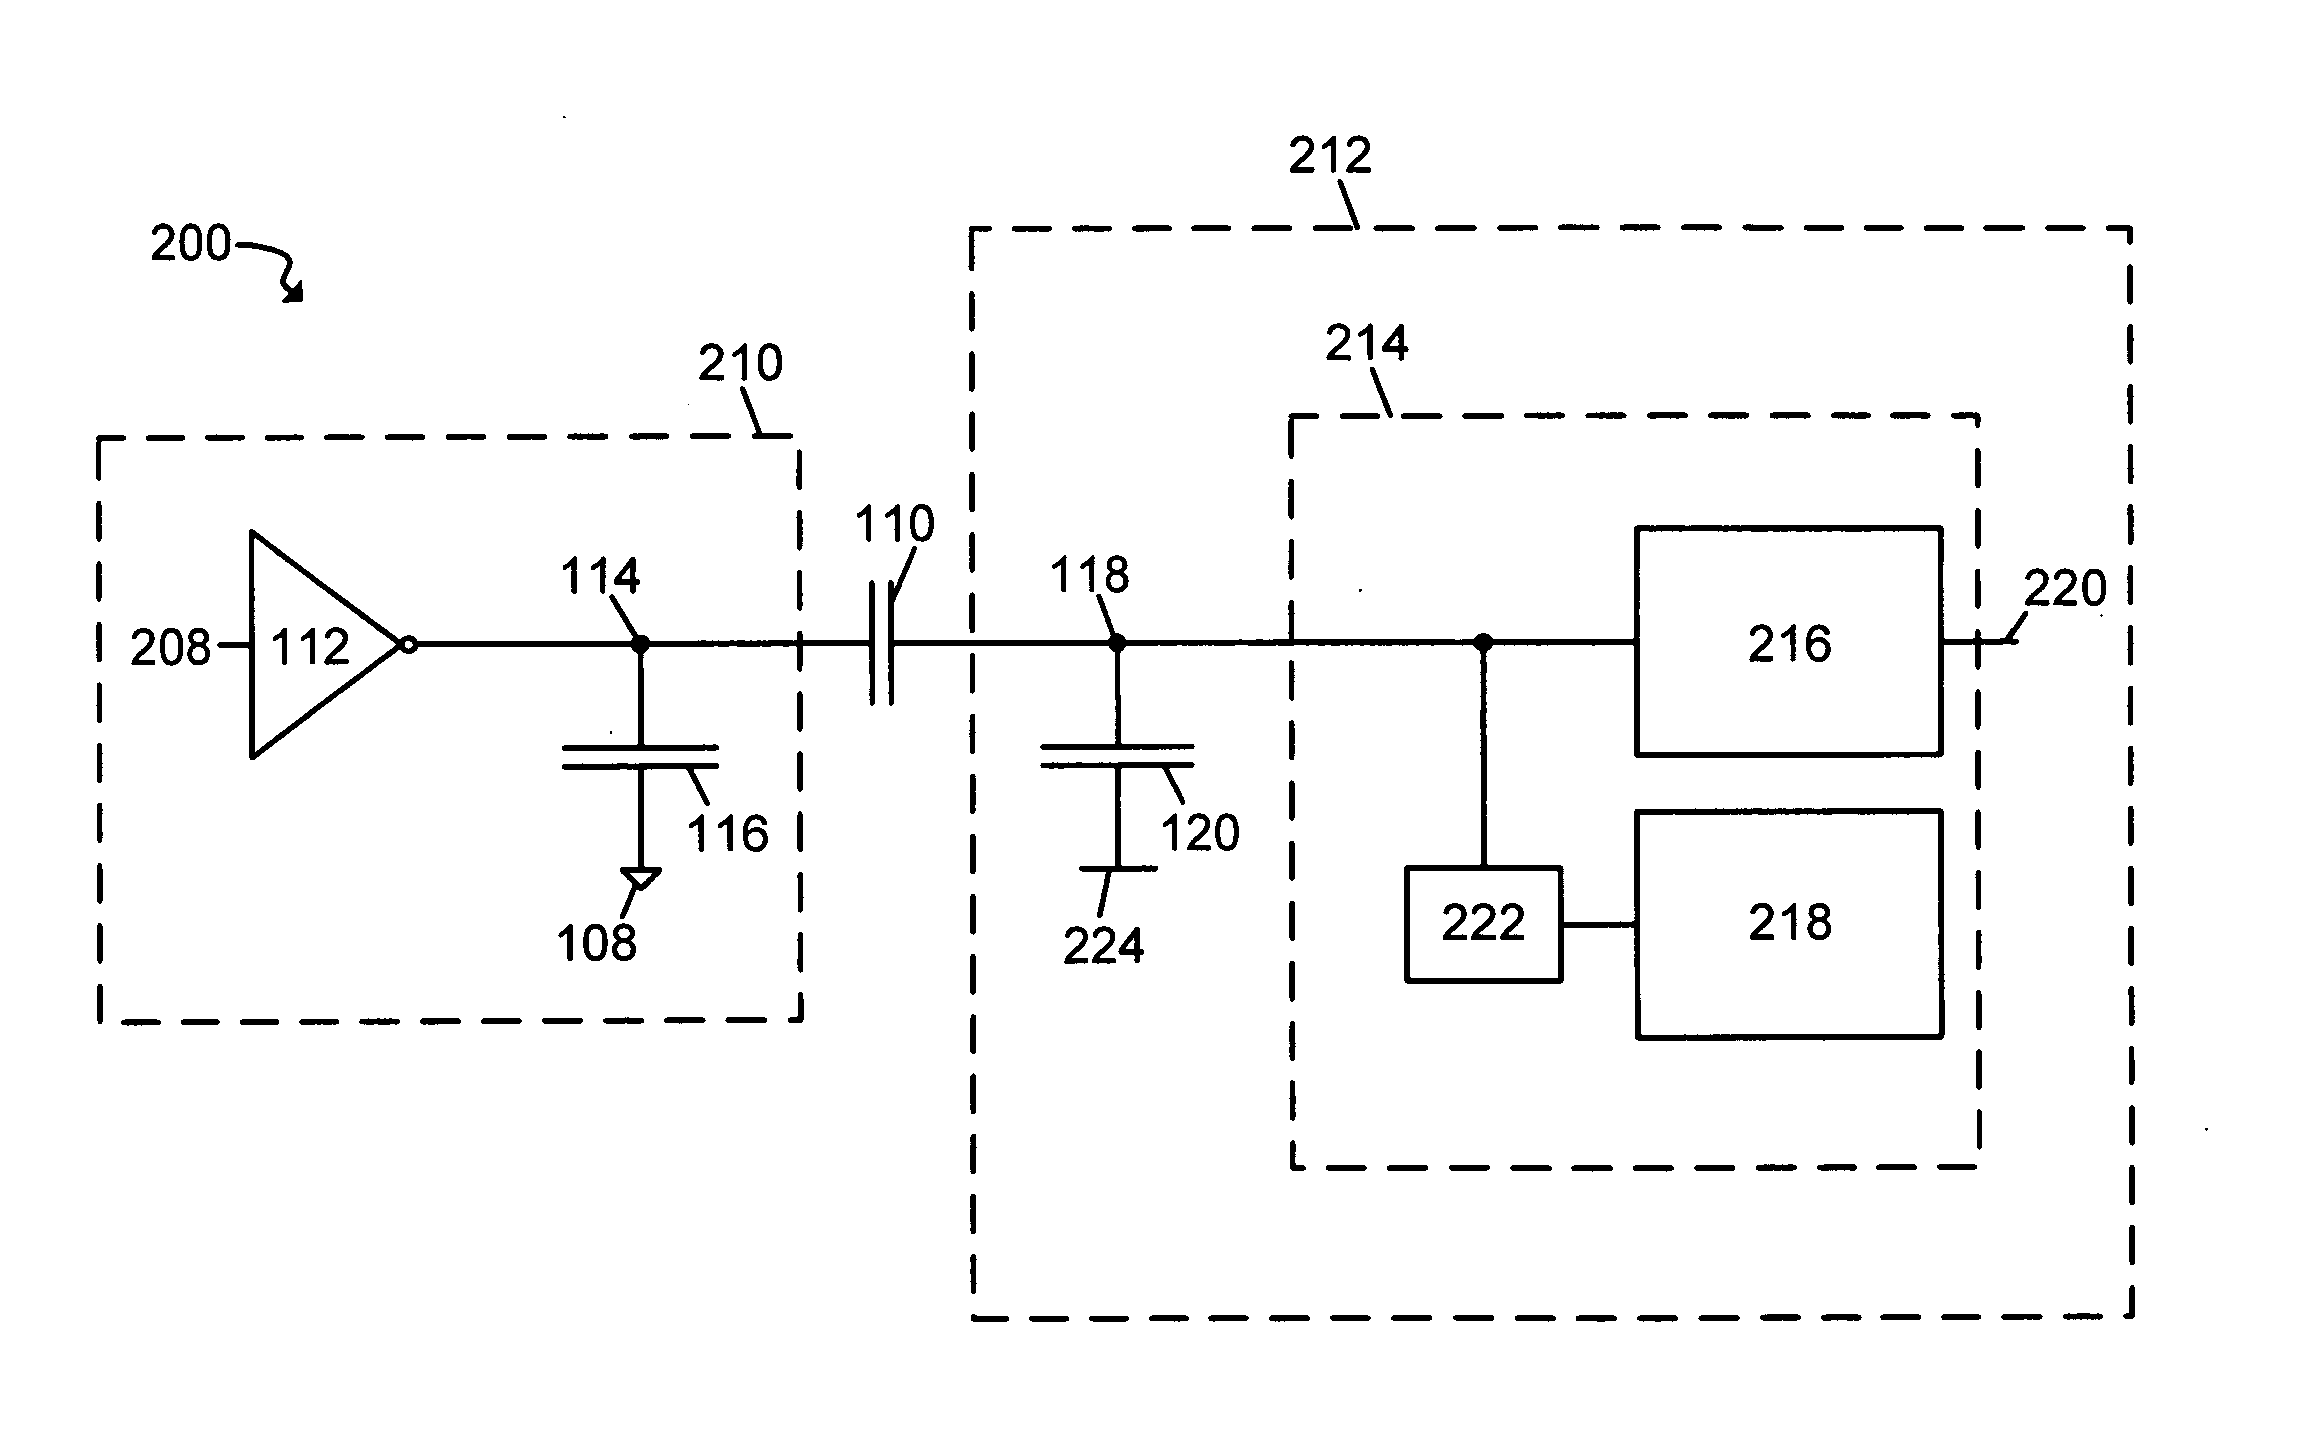 Floating input amplifier for capacitively coupled communication